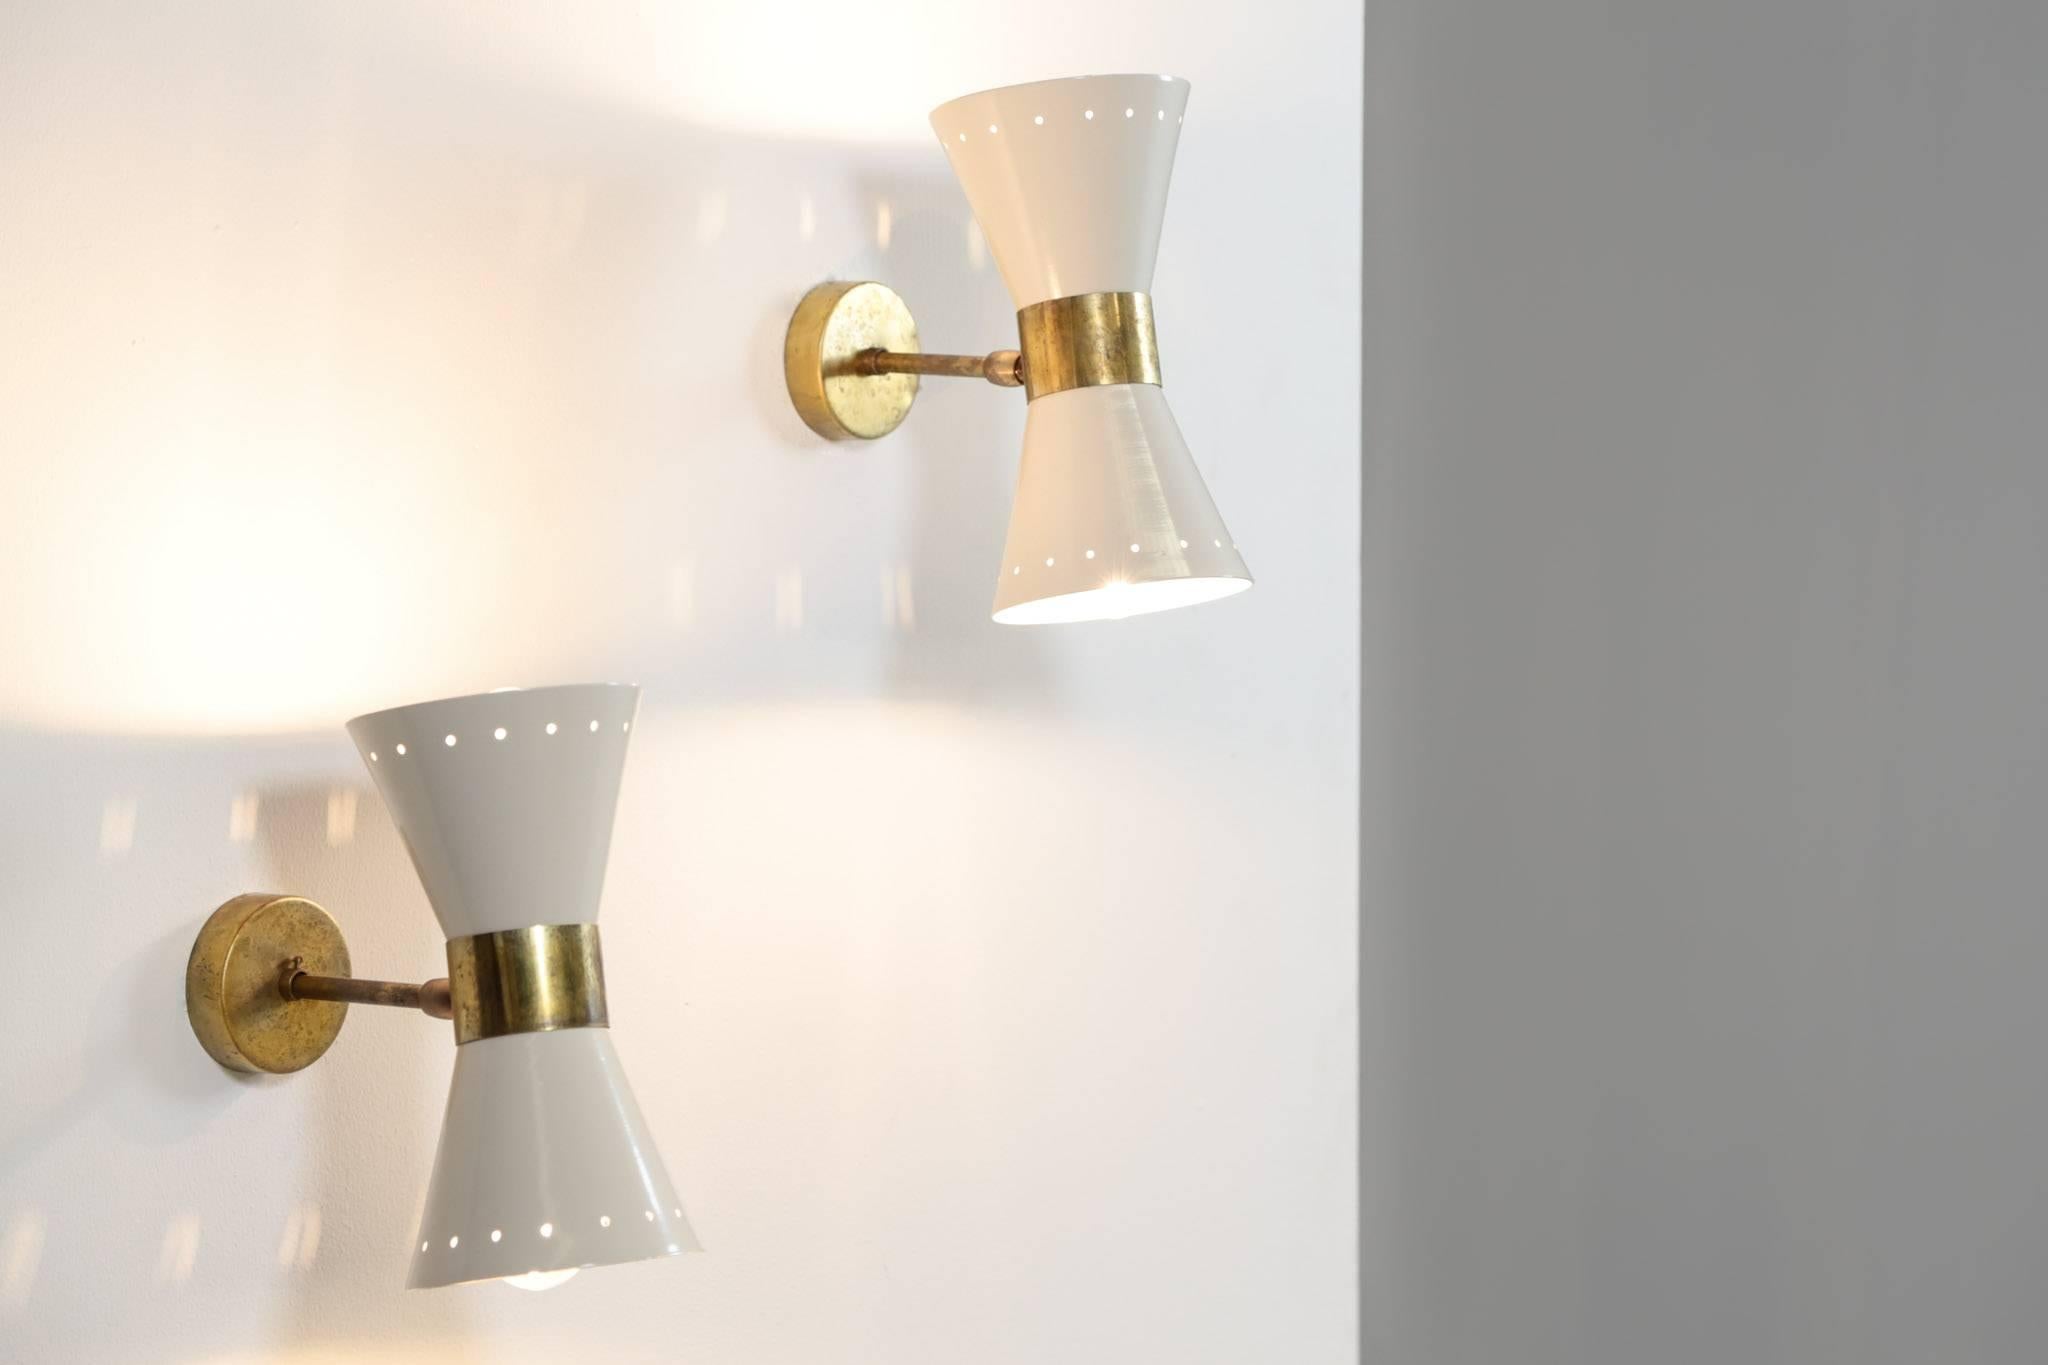 Italian modern diabolo sconces. The lampshades are adjustable and can light in different directions.
Two bulbs per lampshade.
Excellent condition, beautiful sculptural and decorative wall light style Stilnovo.